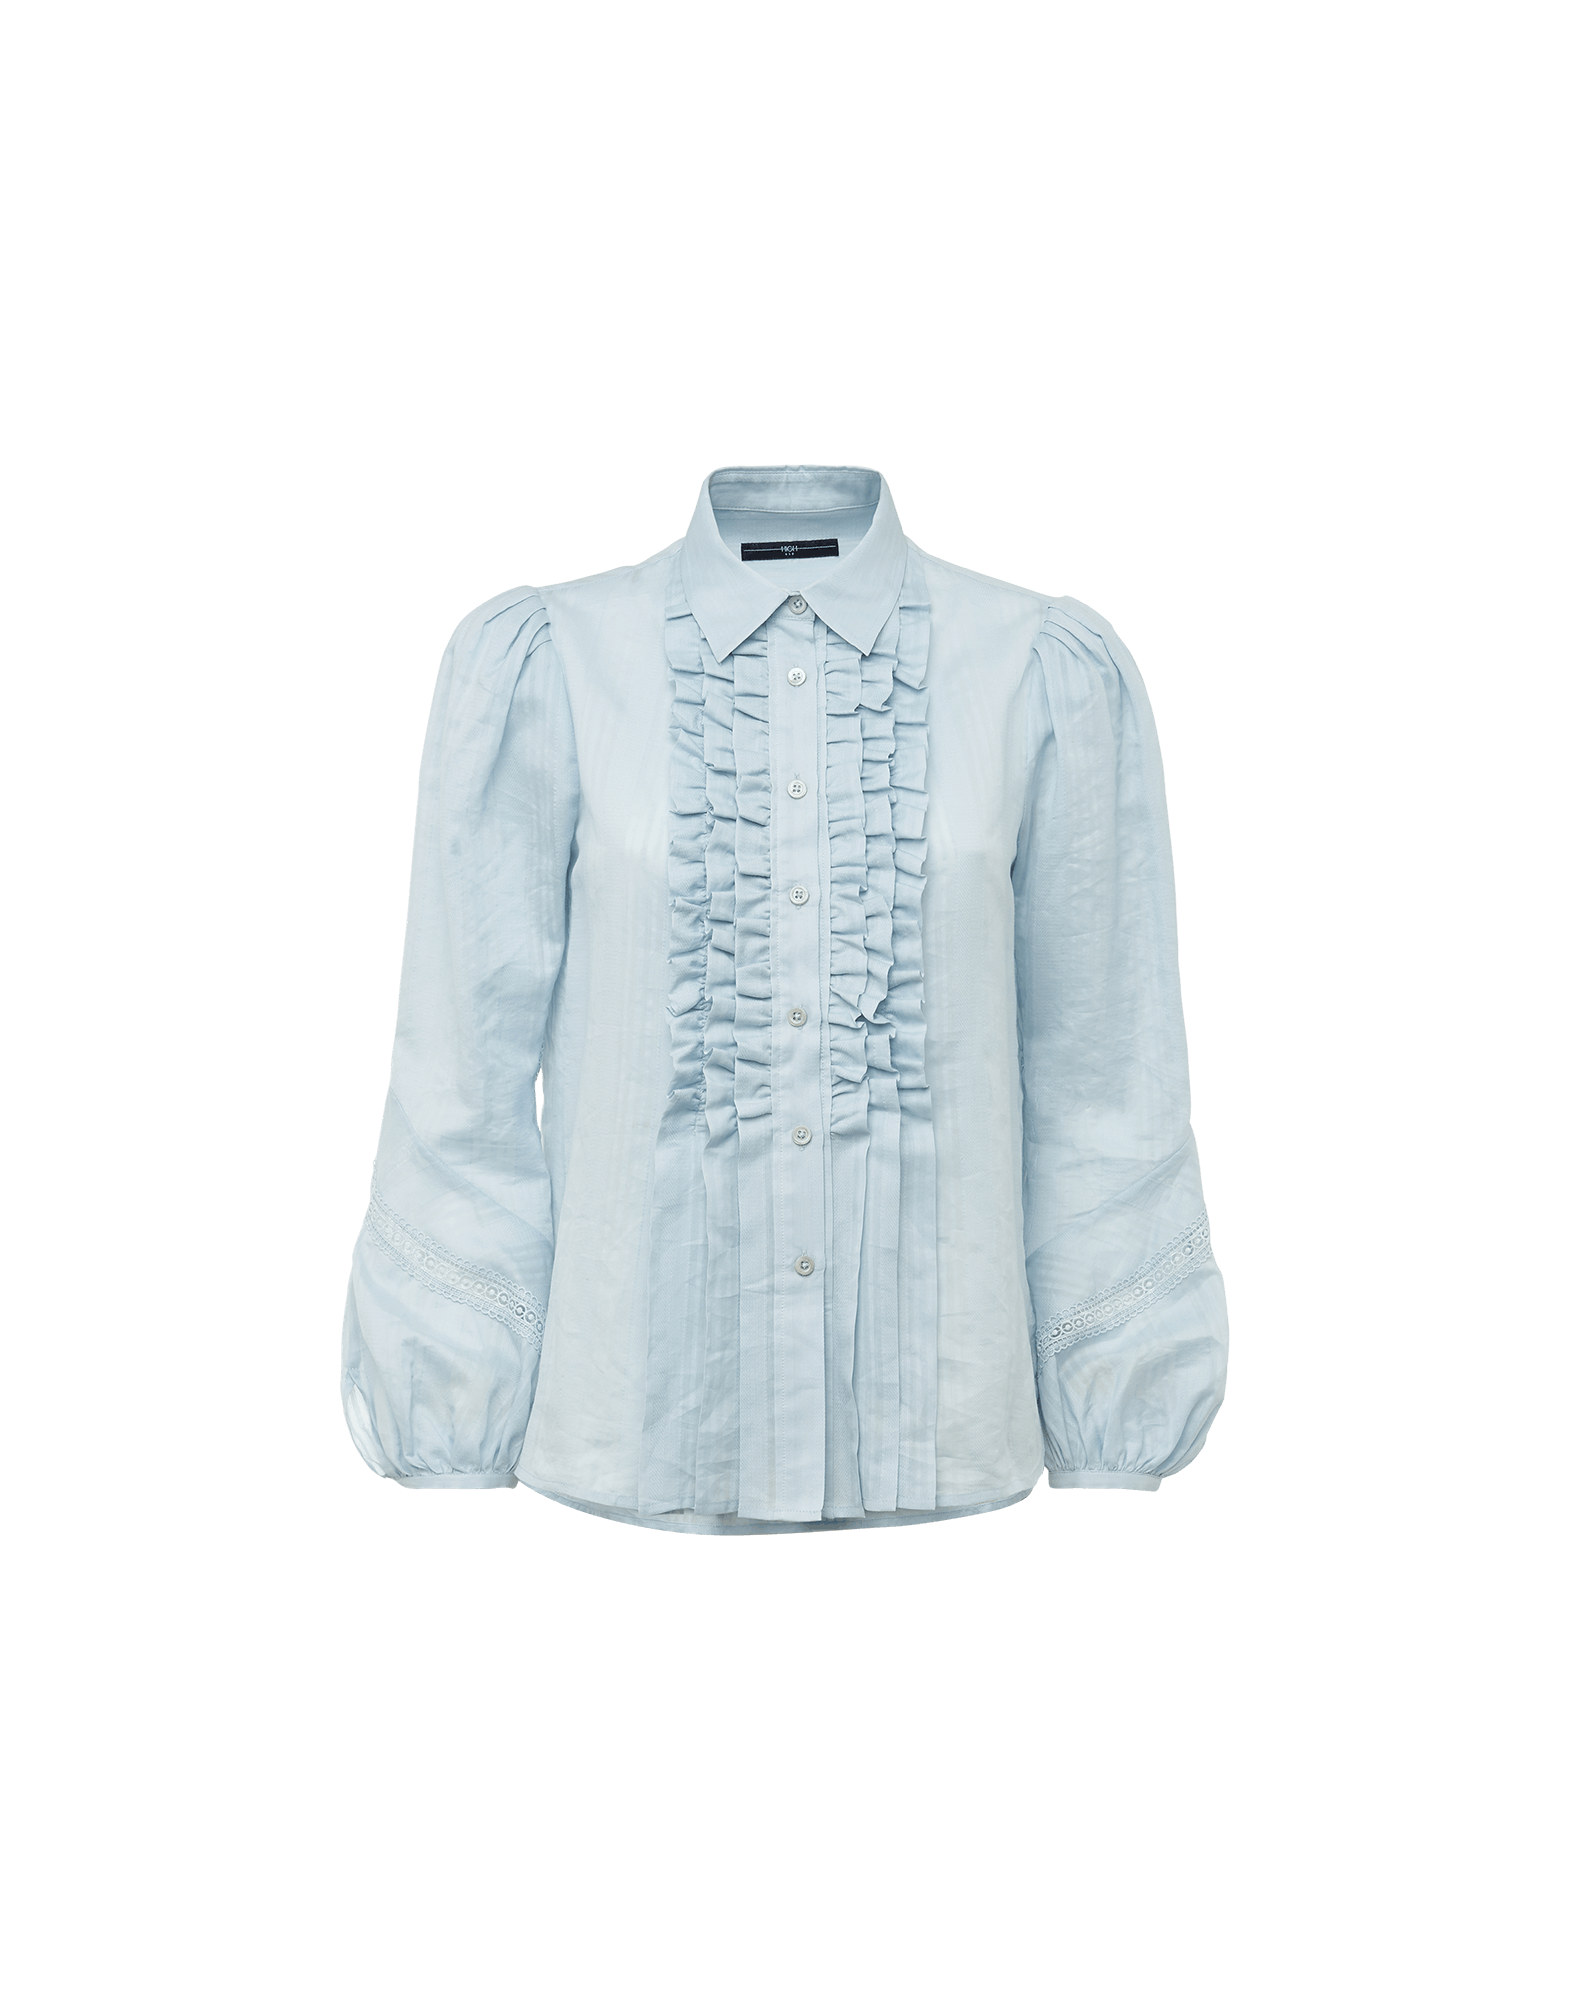 NOTIFY: Pale with blue bell shirt front sleeves ruffle